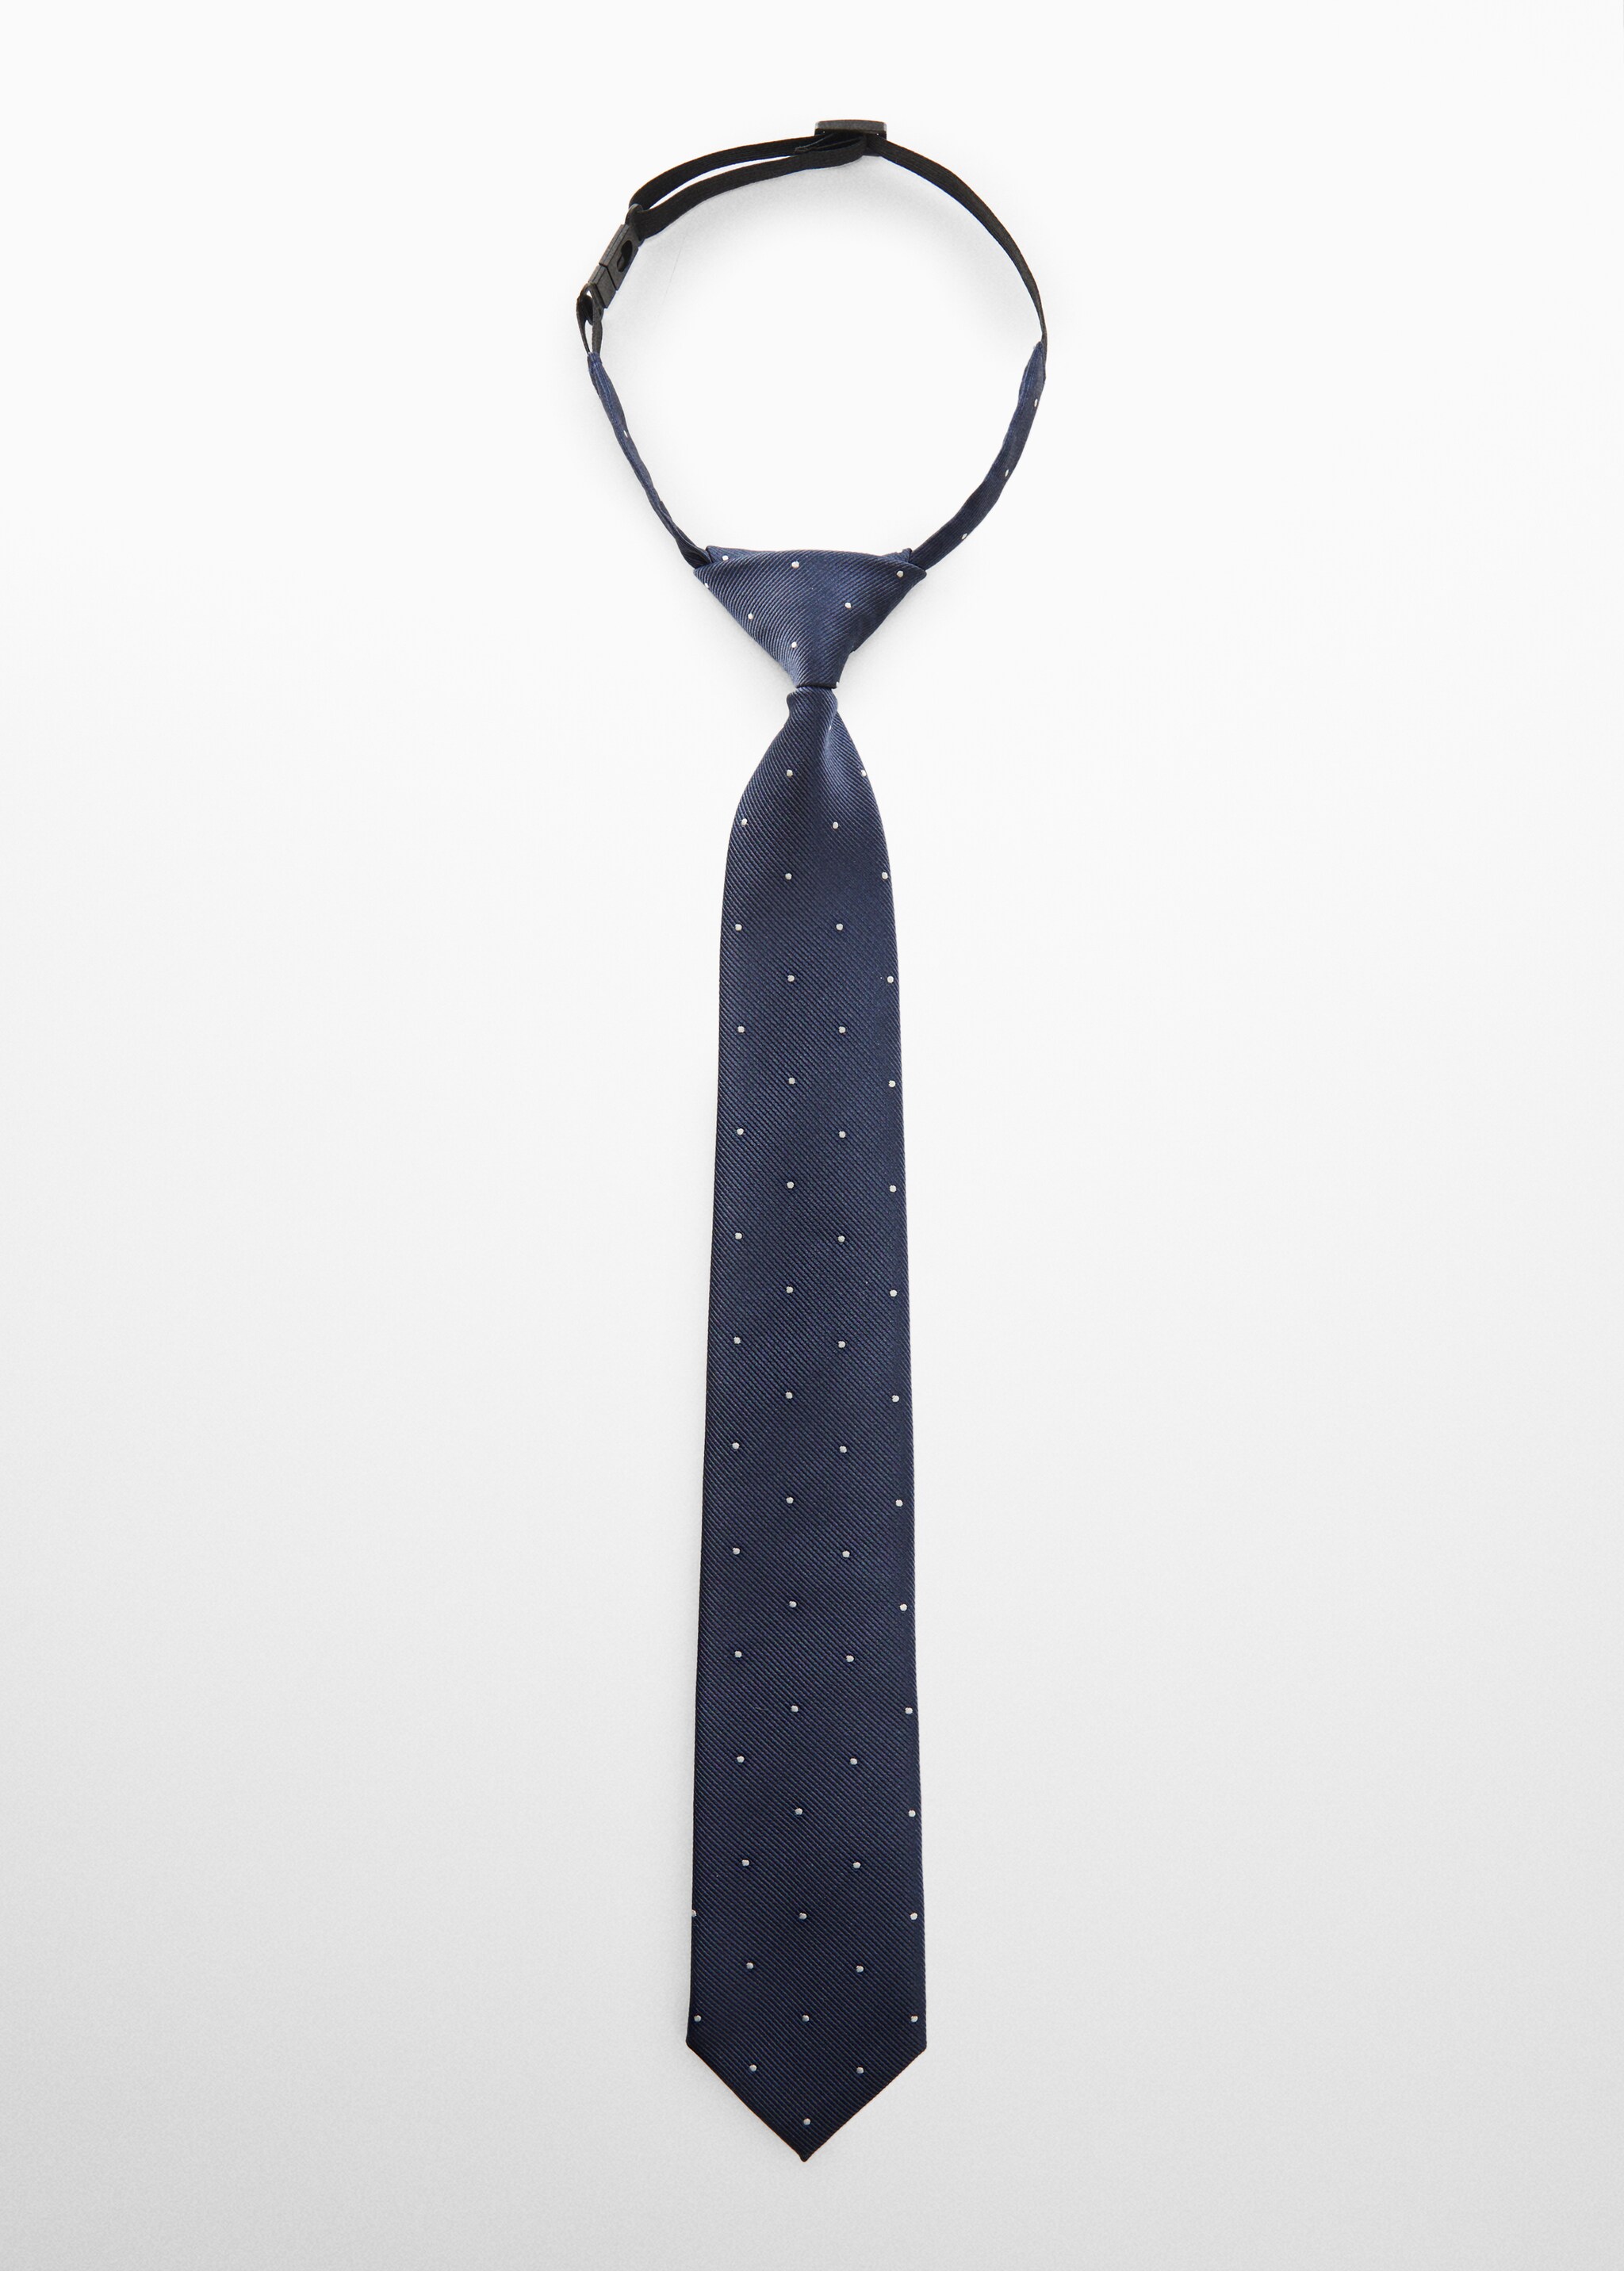 Polka-dot tie - Article without model